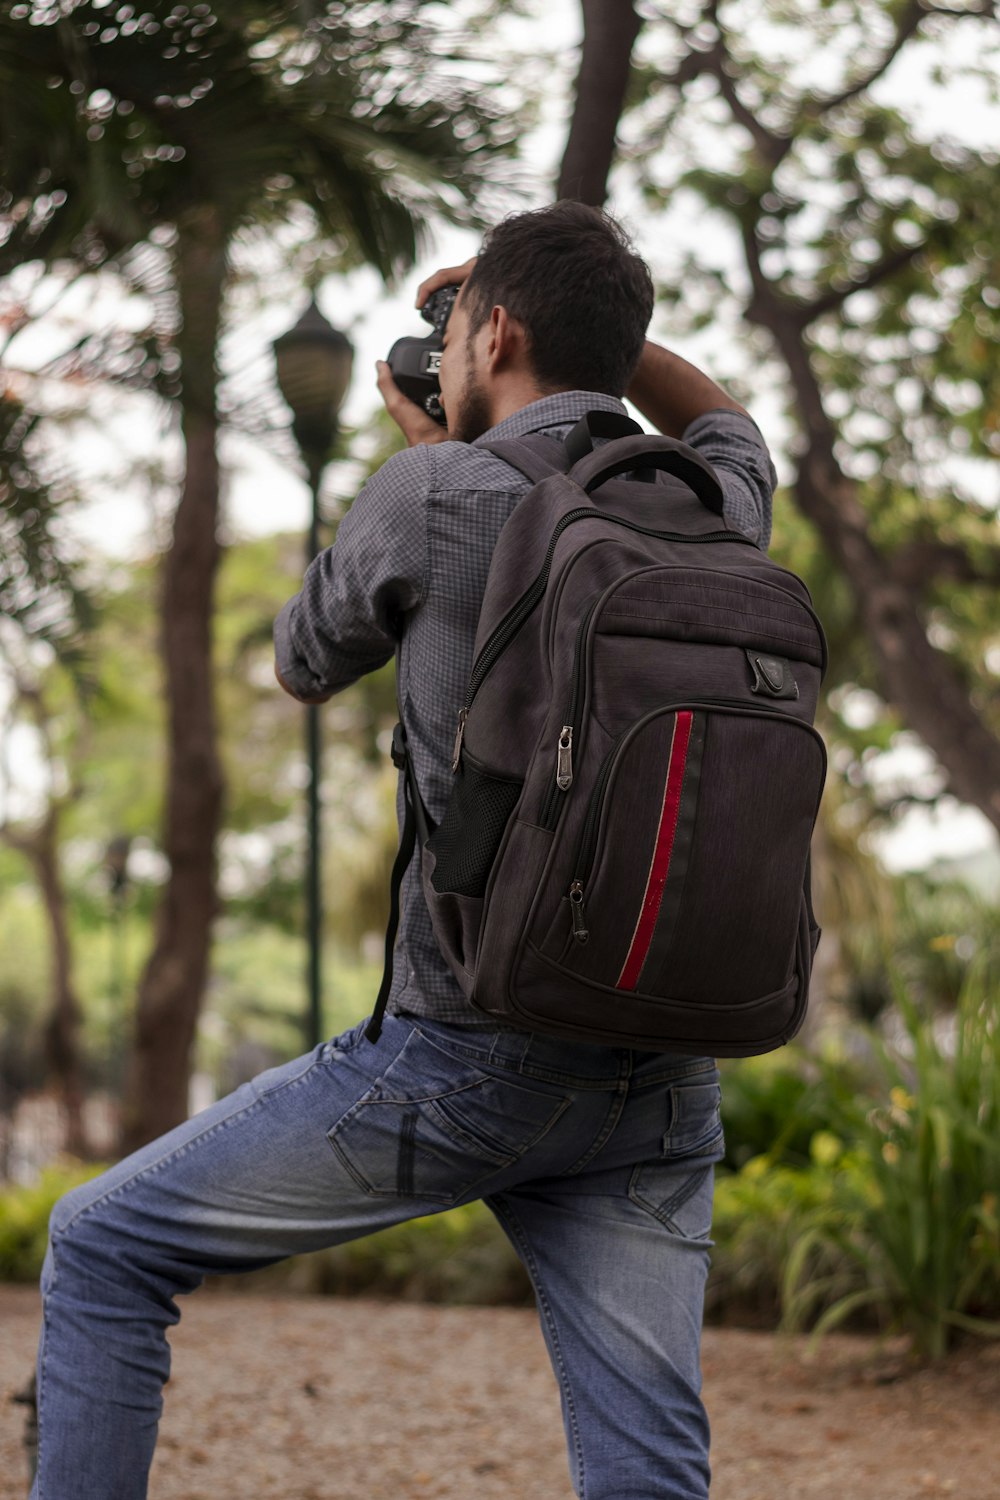 man wearing gray long-sleeved shirt with black backpack standing while taking photo on trees during daytime